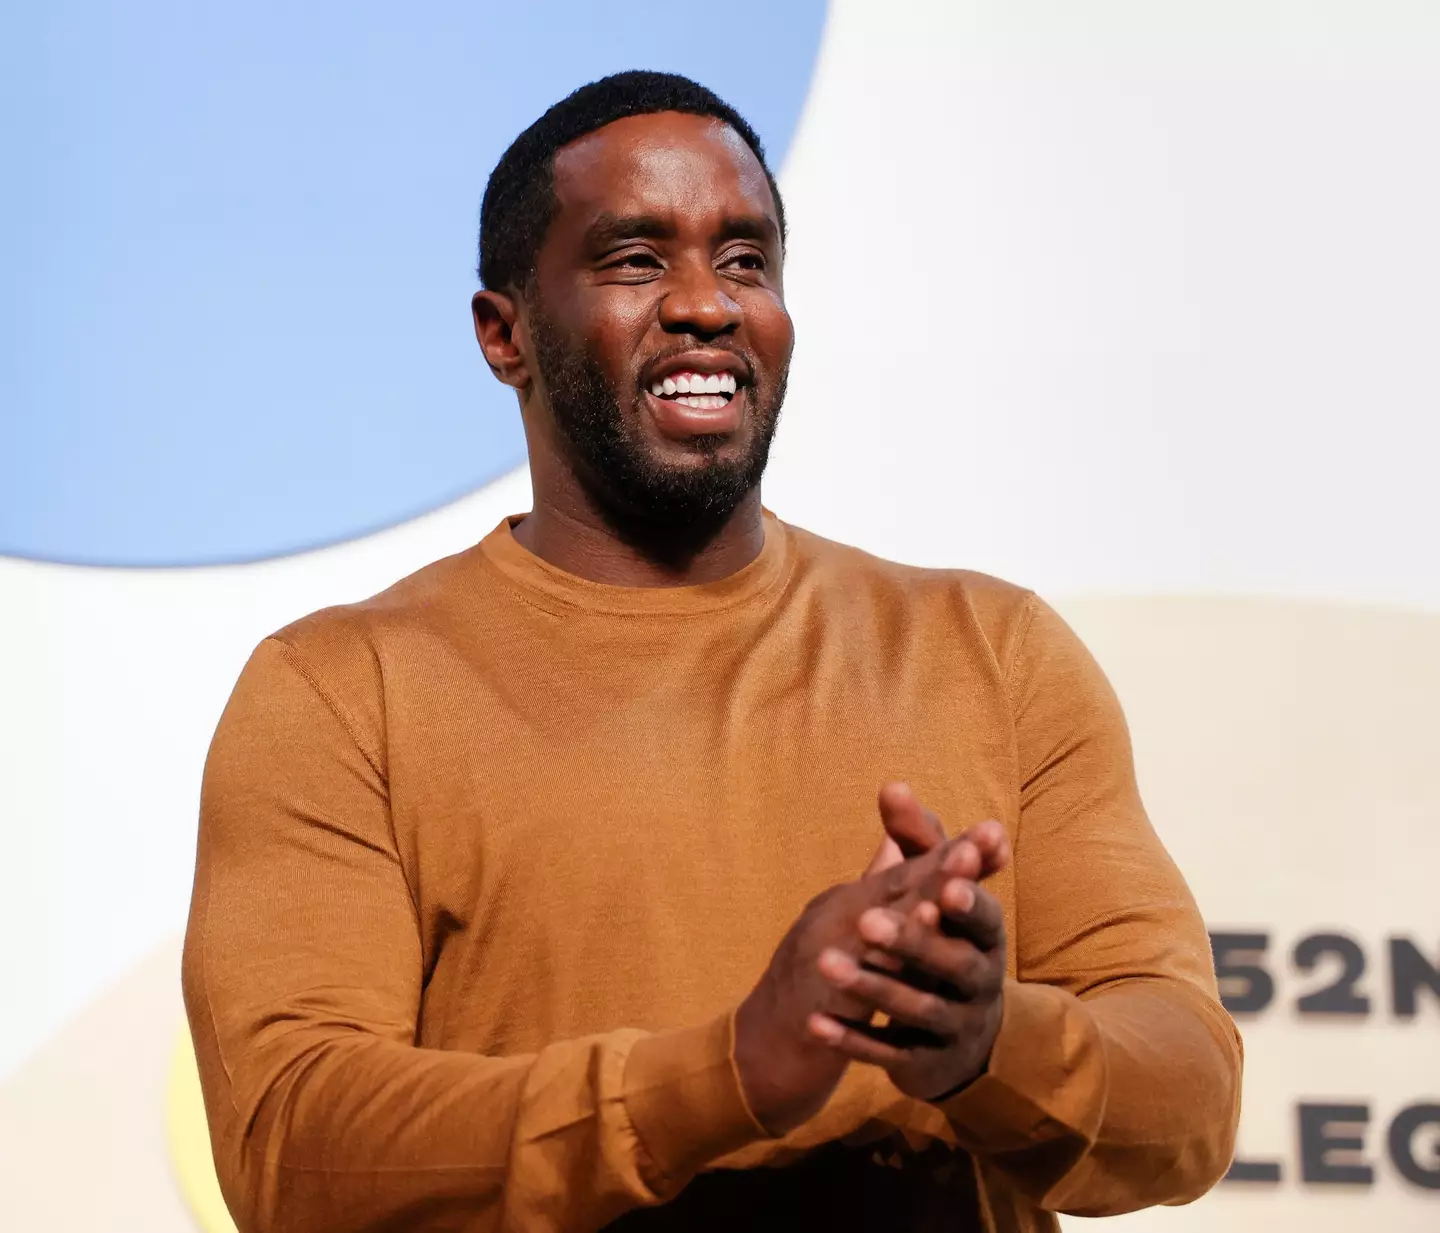 Diddy has denied allegations of assault. (Jemal Countess/Getty Images for Congressional Black Caucus Foundation)